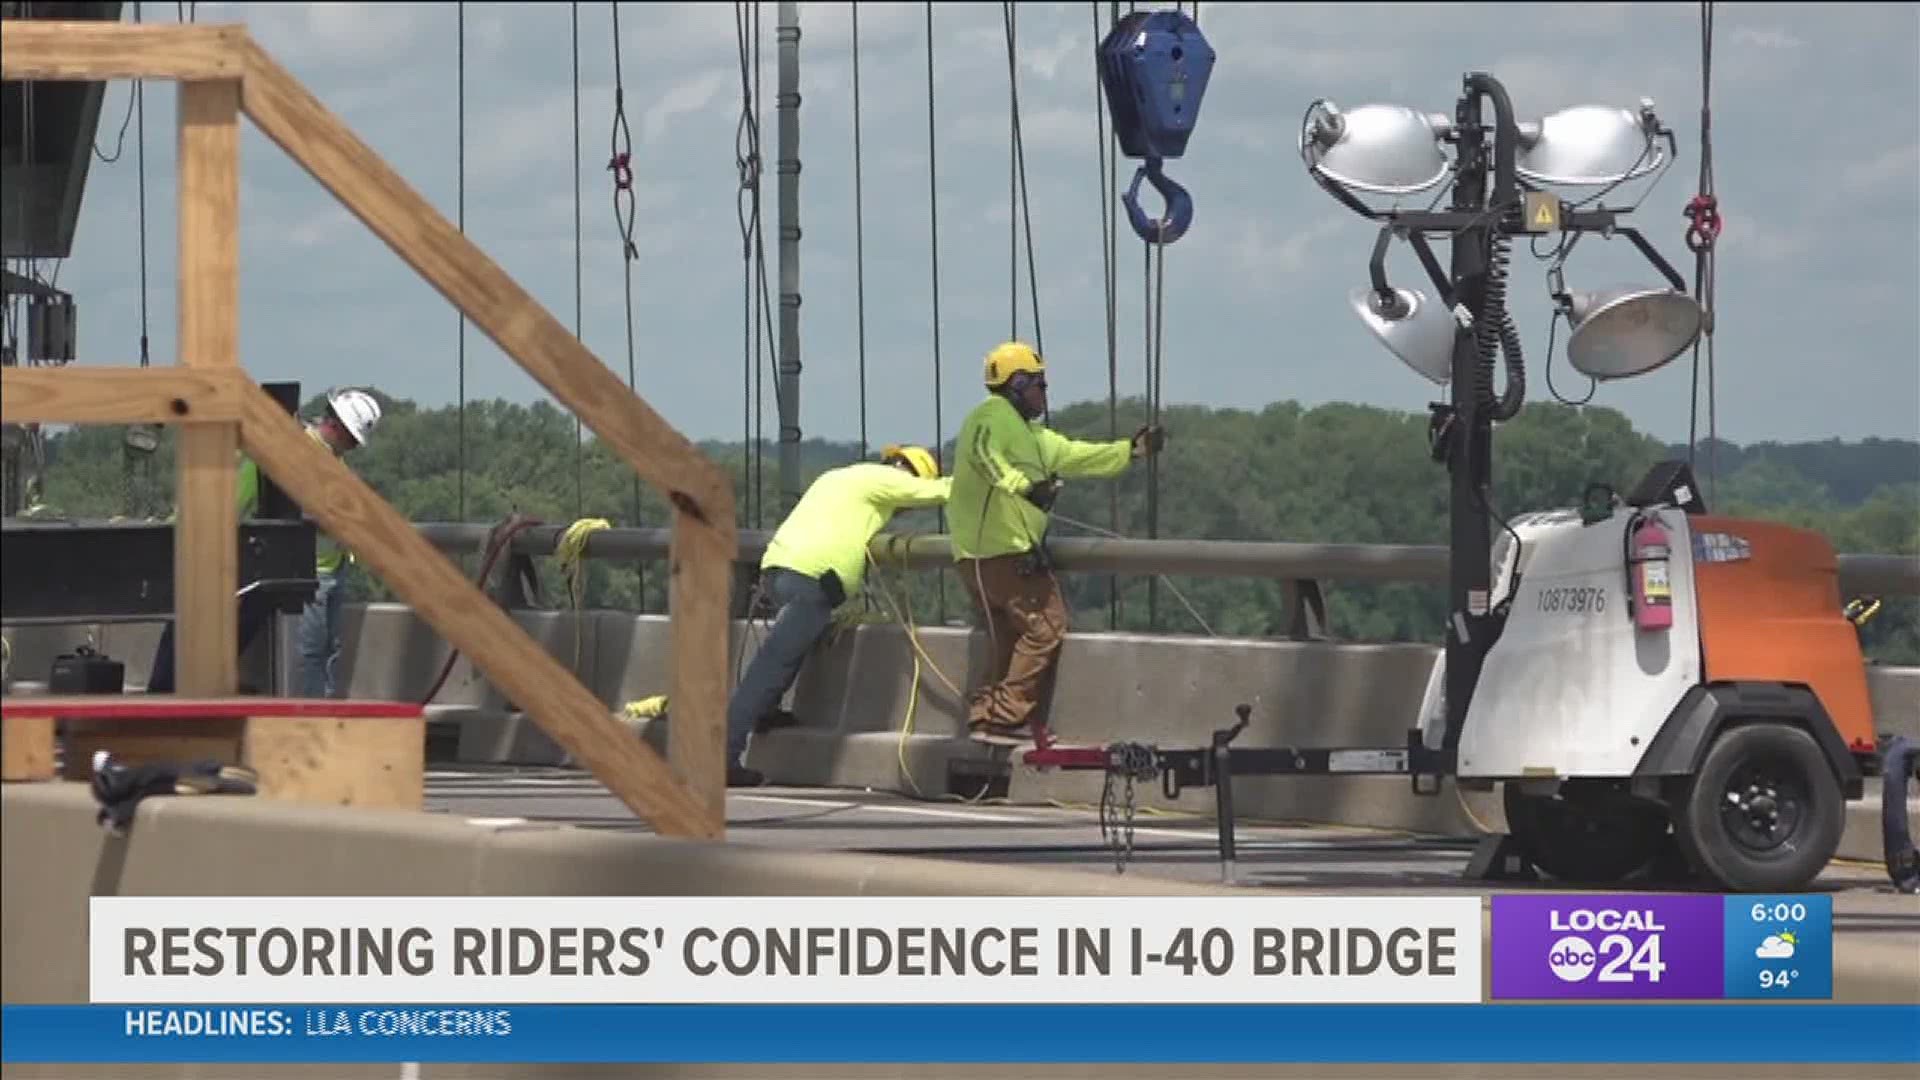 "It’s natural to have some hesitancy... The engineers are very confident the bridge is fine," said Nichole Lawrence, TDOT spokesperson.